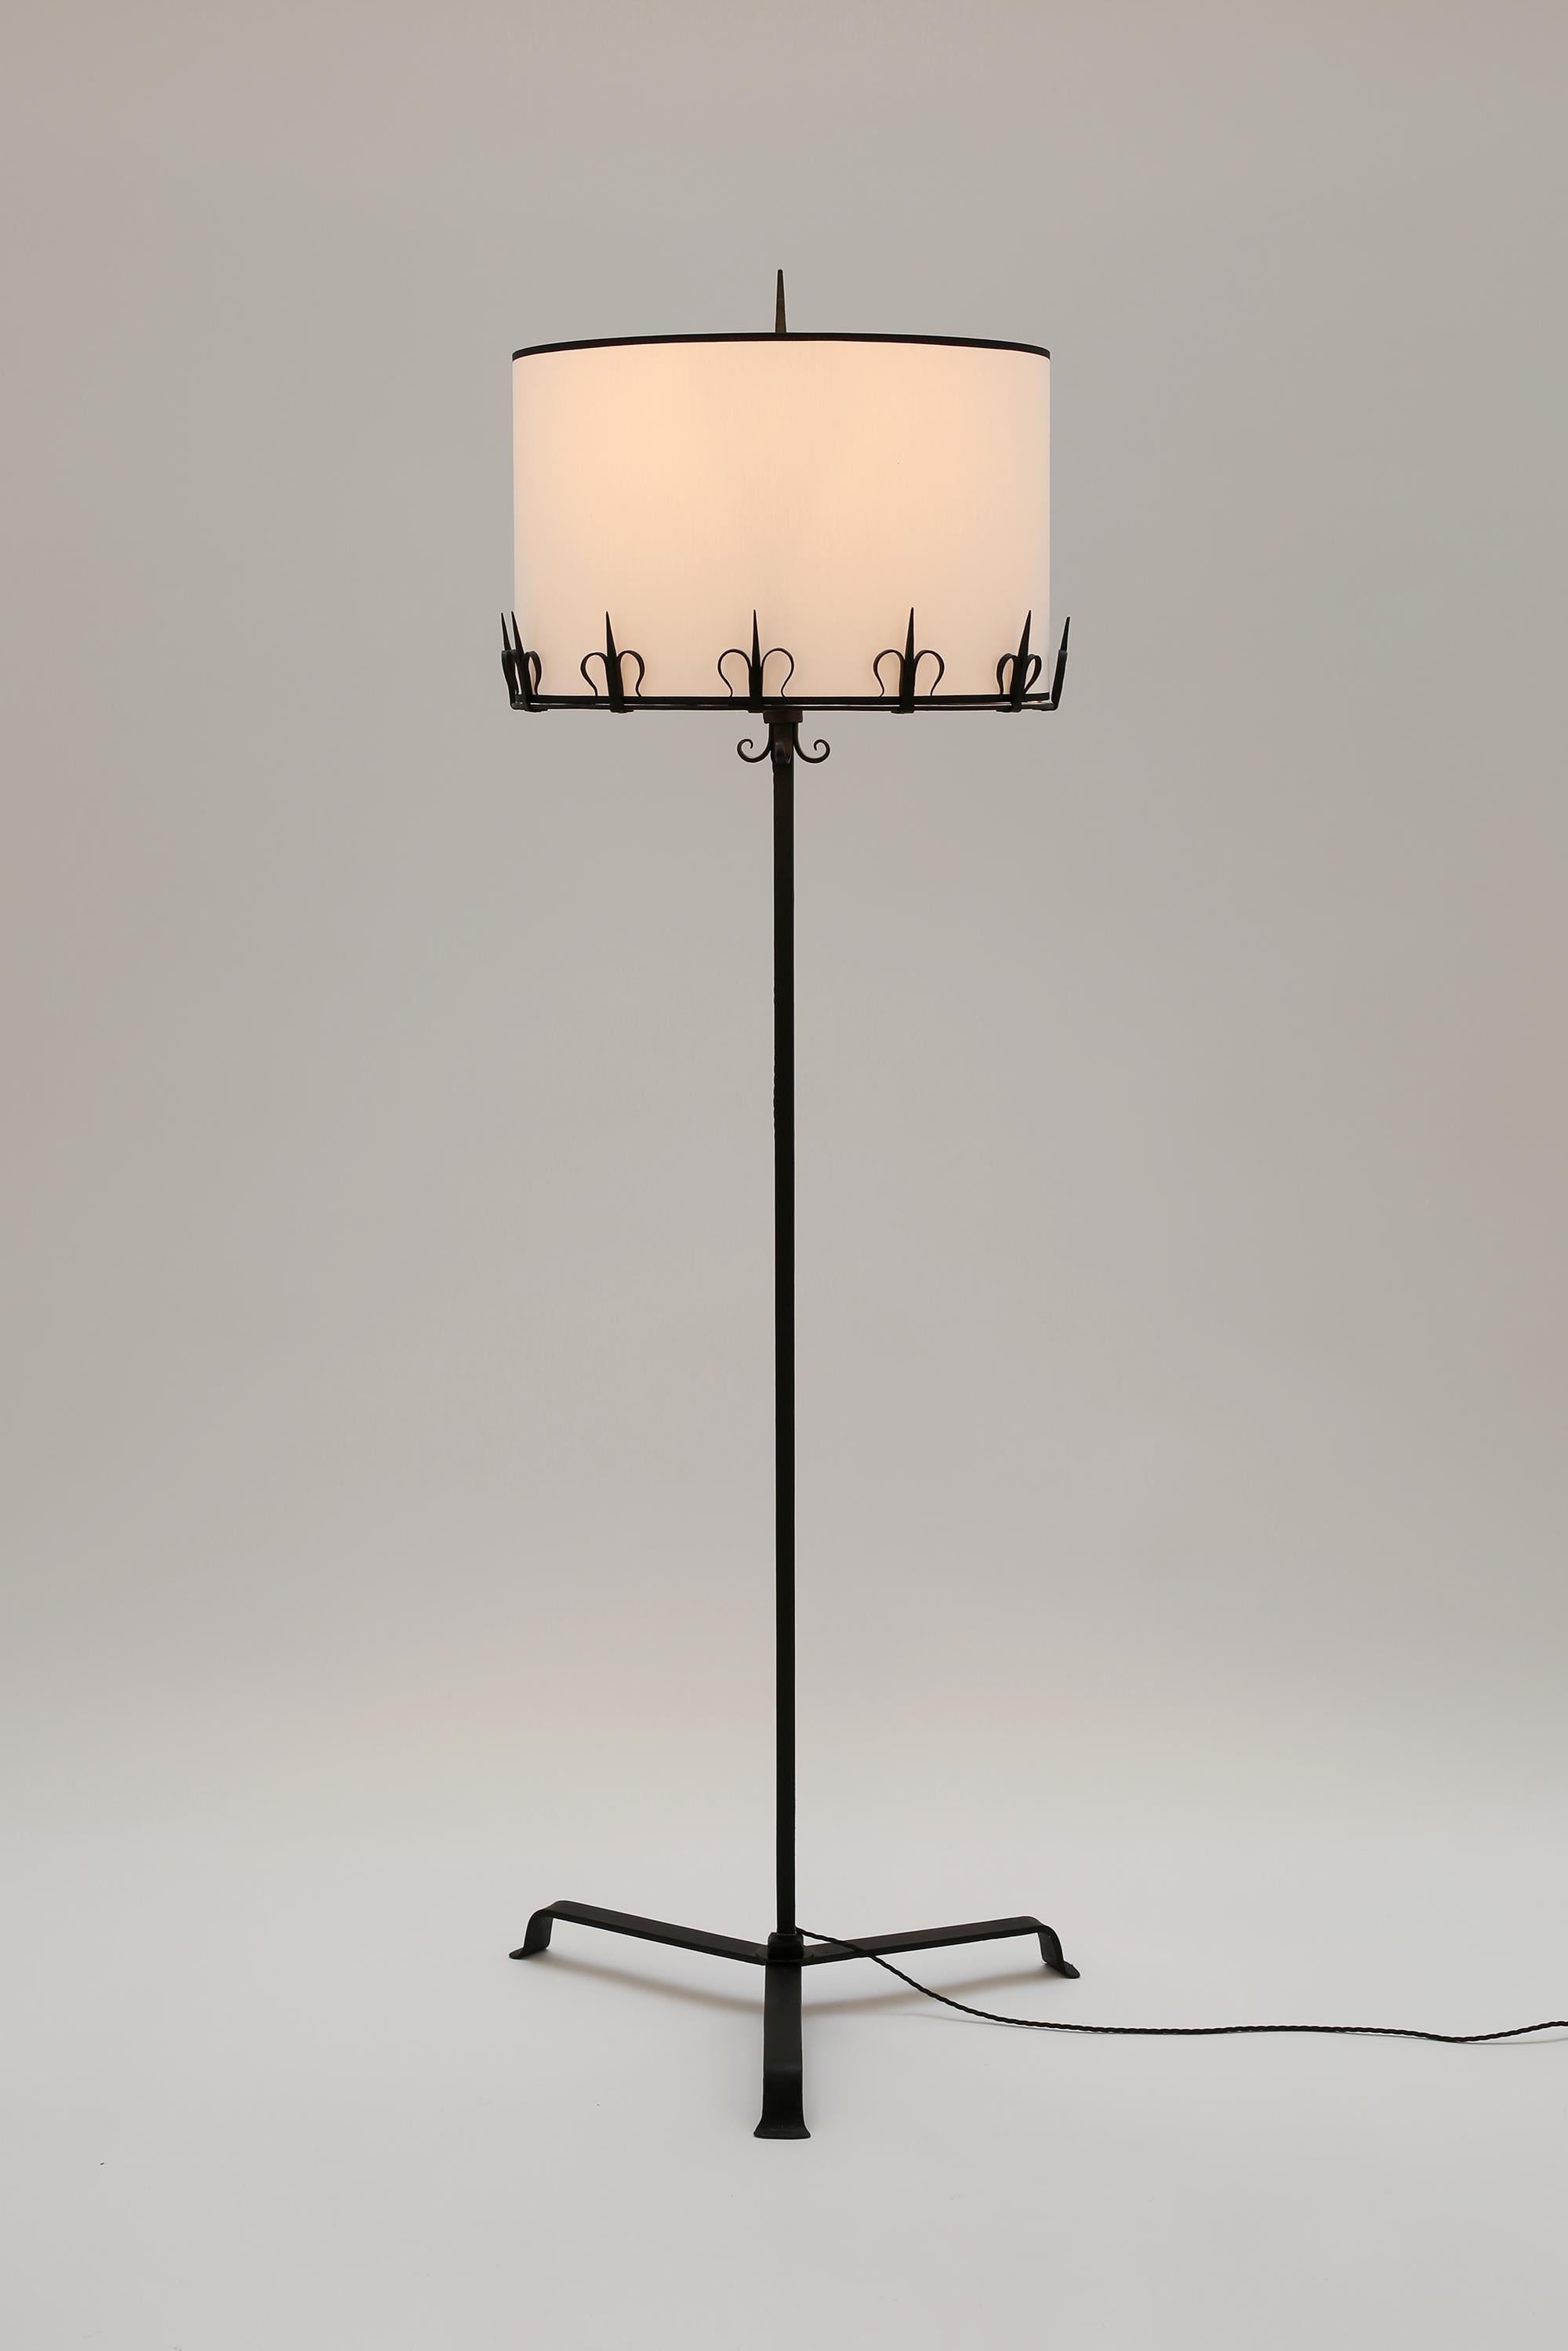 A run of five forged and enamelled iron floor lamps in the taste of Les Artisans de Marolles, with decorative fleur-de-lis detailing, three point bases and new white cotton shades with black trim. From a hotel in Andalusia, southern Spain, c. 1960.